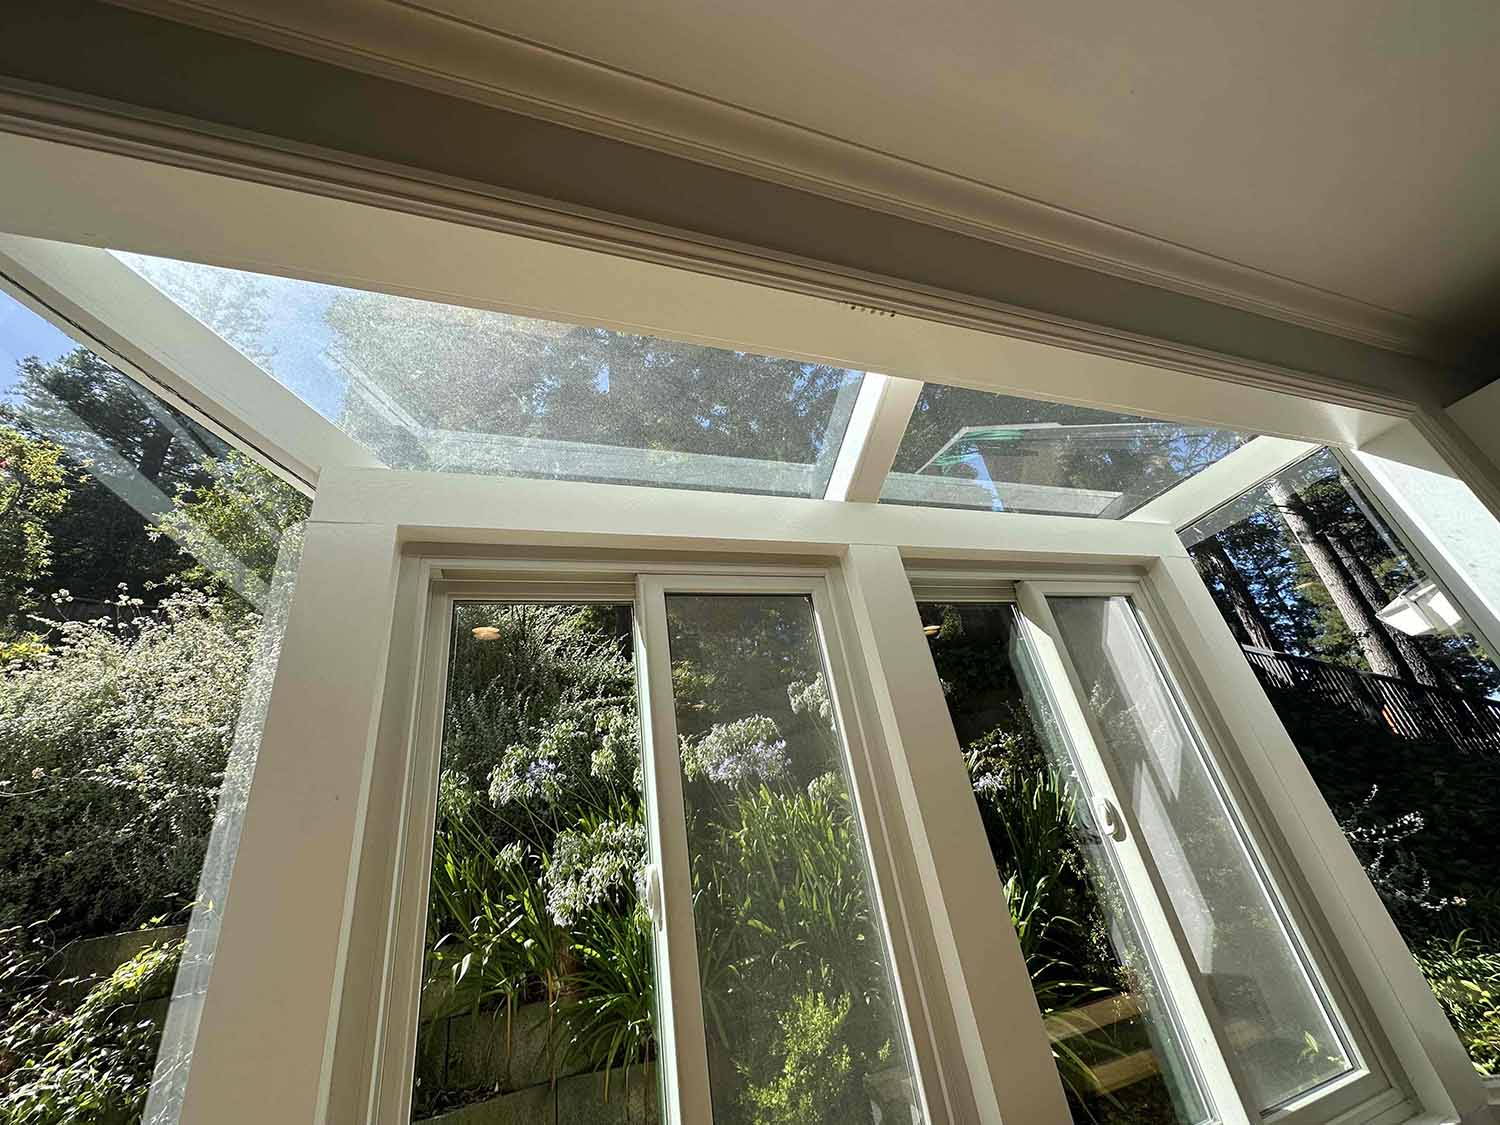 Sun Control Window Film for Skylights, installed by ClimatePro. Get a free estimate throughout the San Francisco Bay Area.